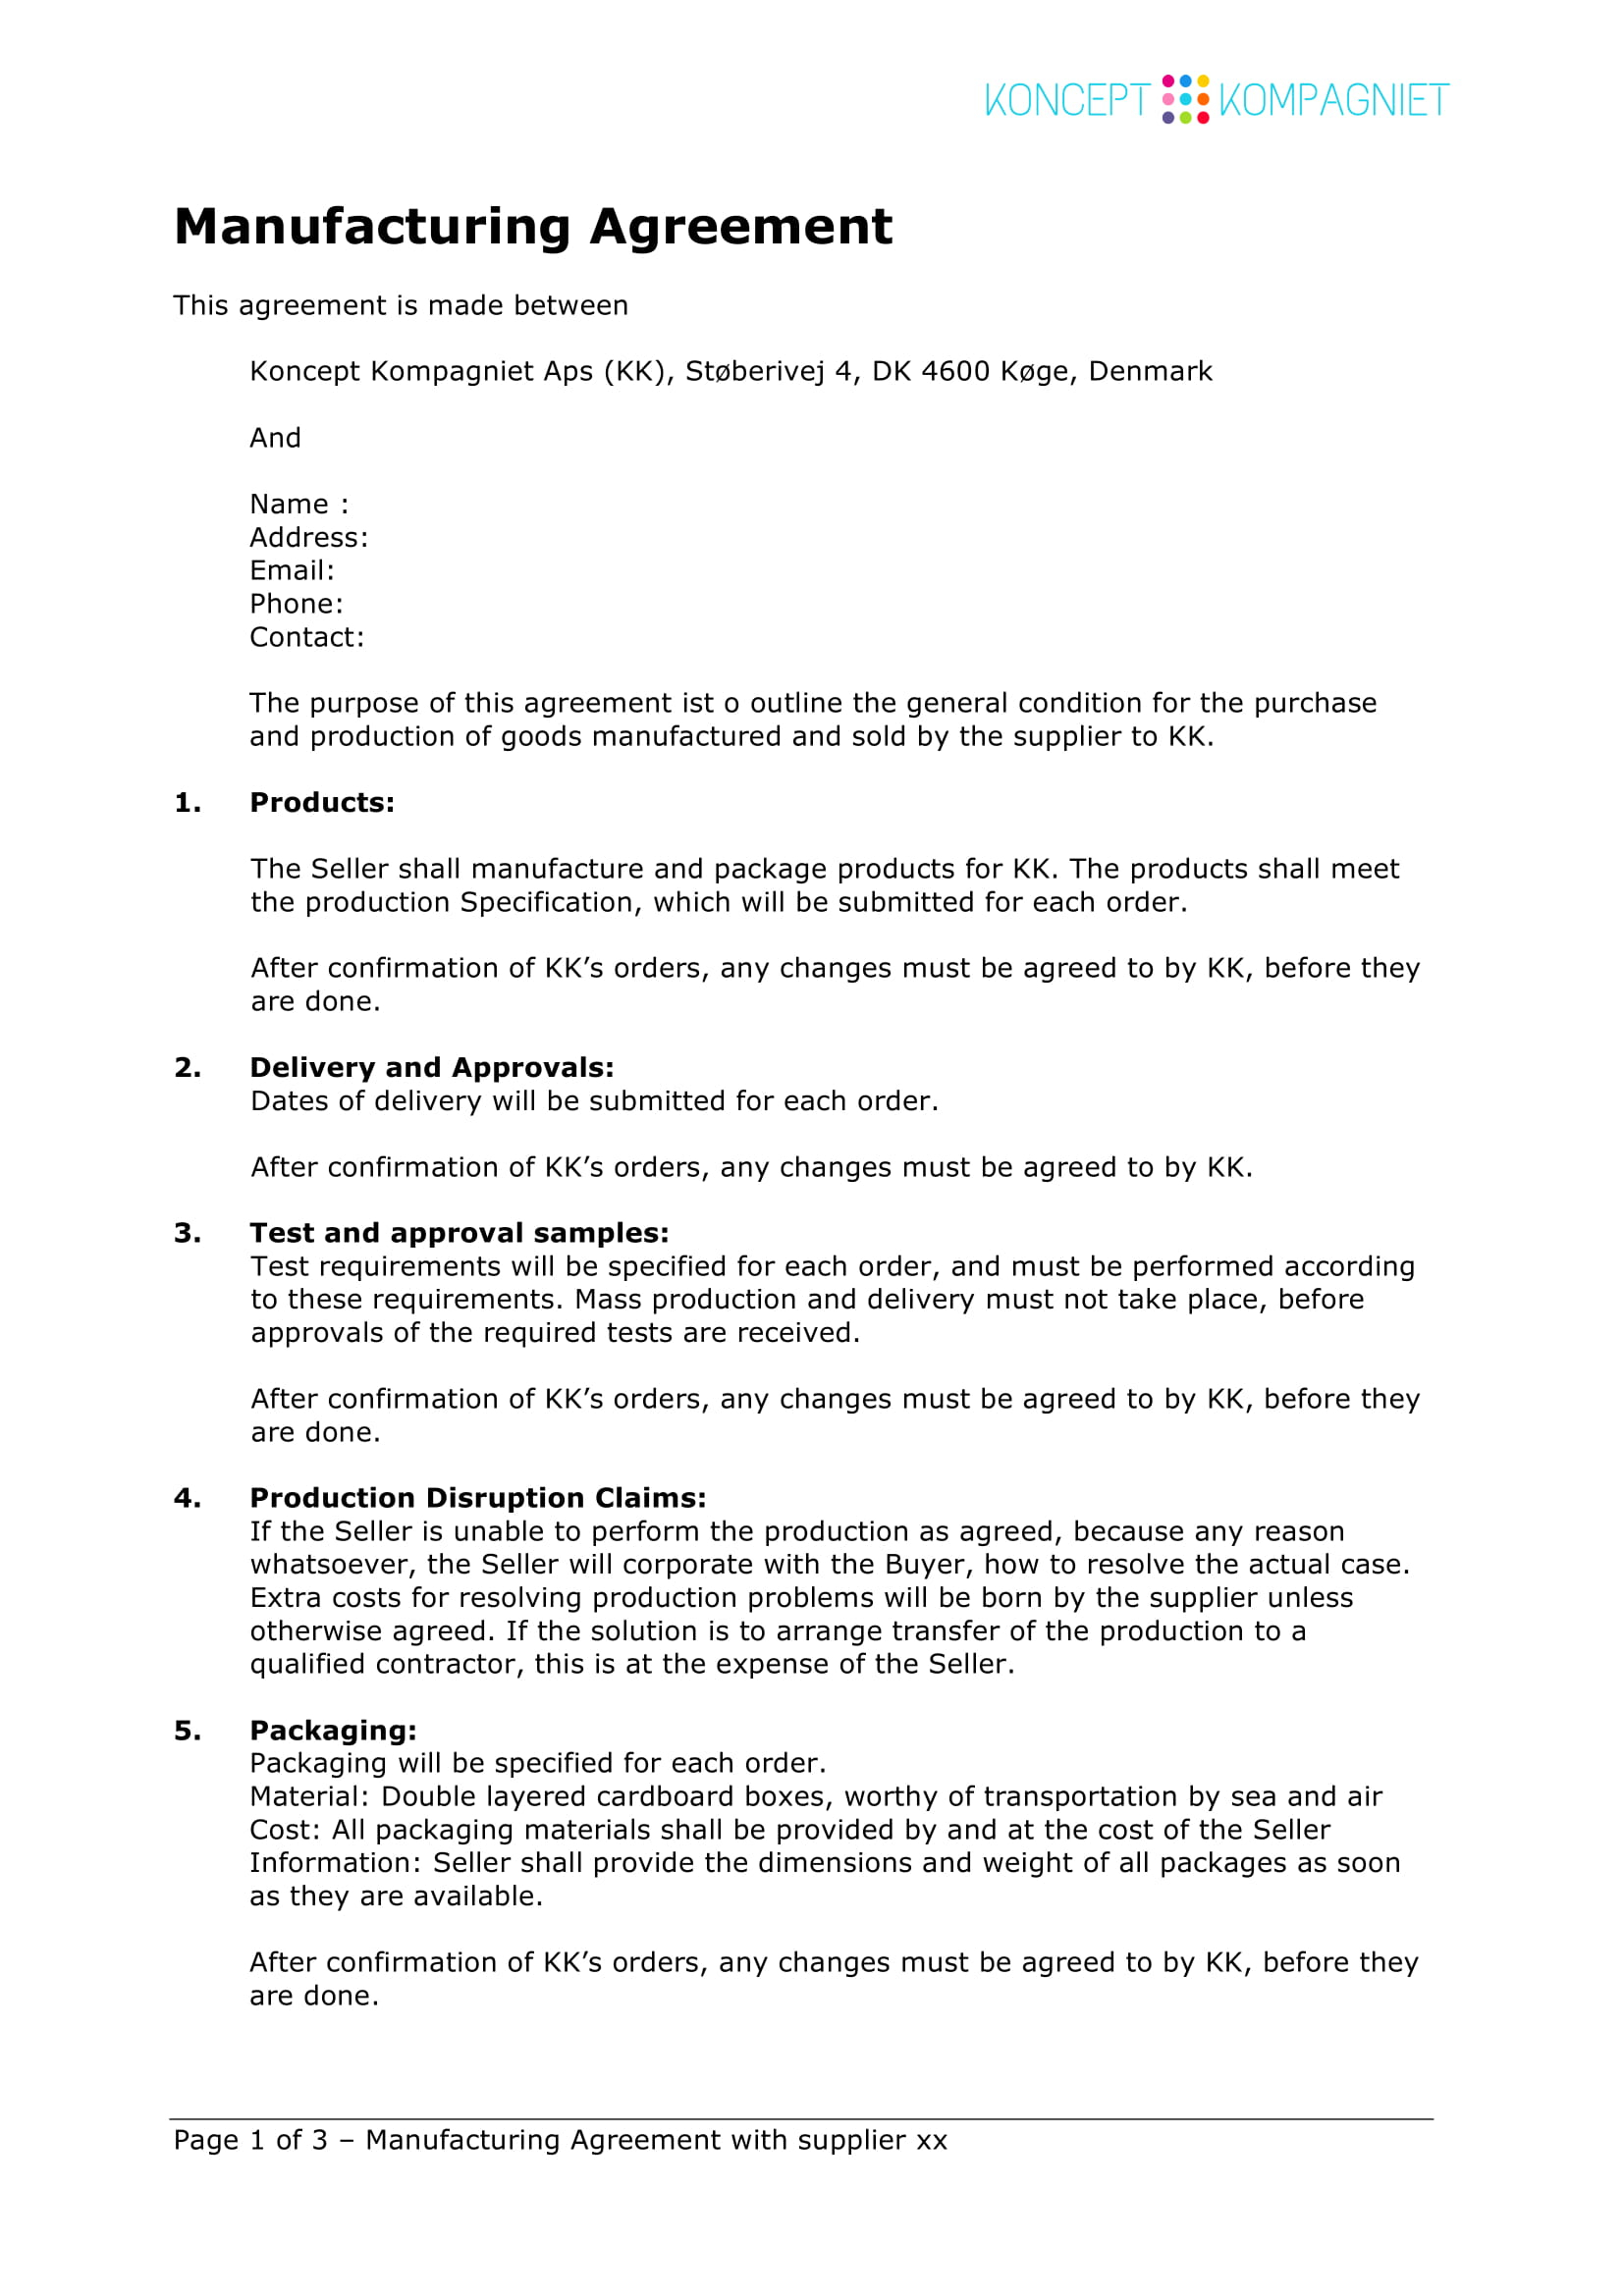 Simple Agreement Contract 11 Contract Manufacturing Agreement Template Examples Pdf Google